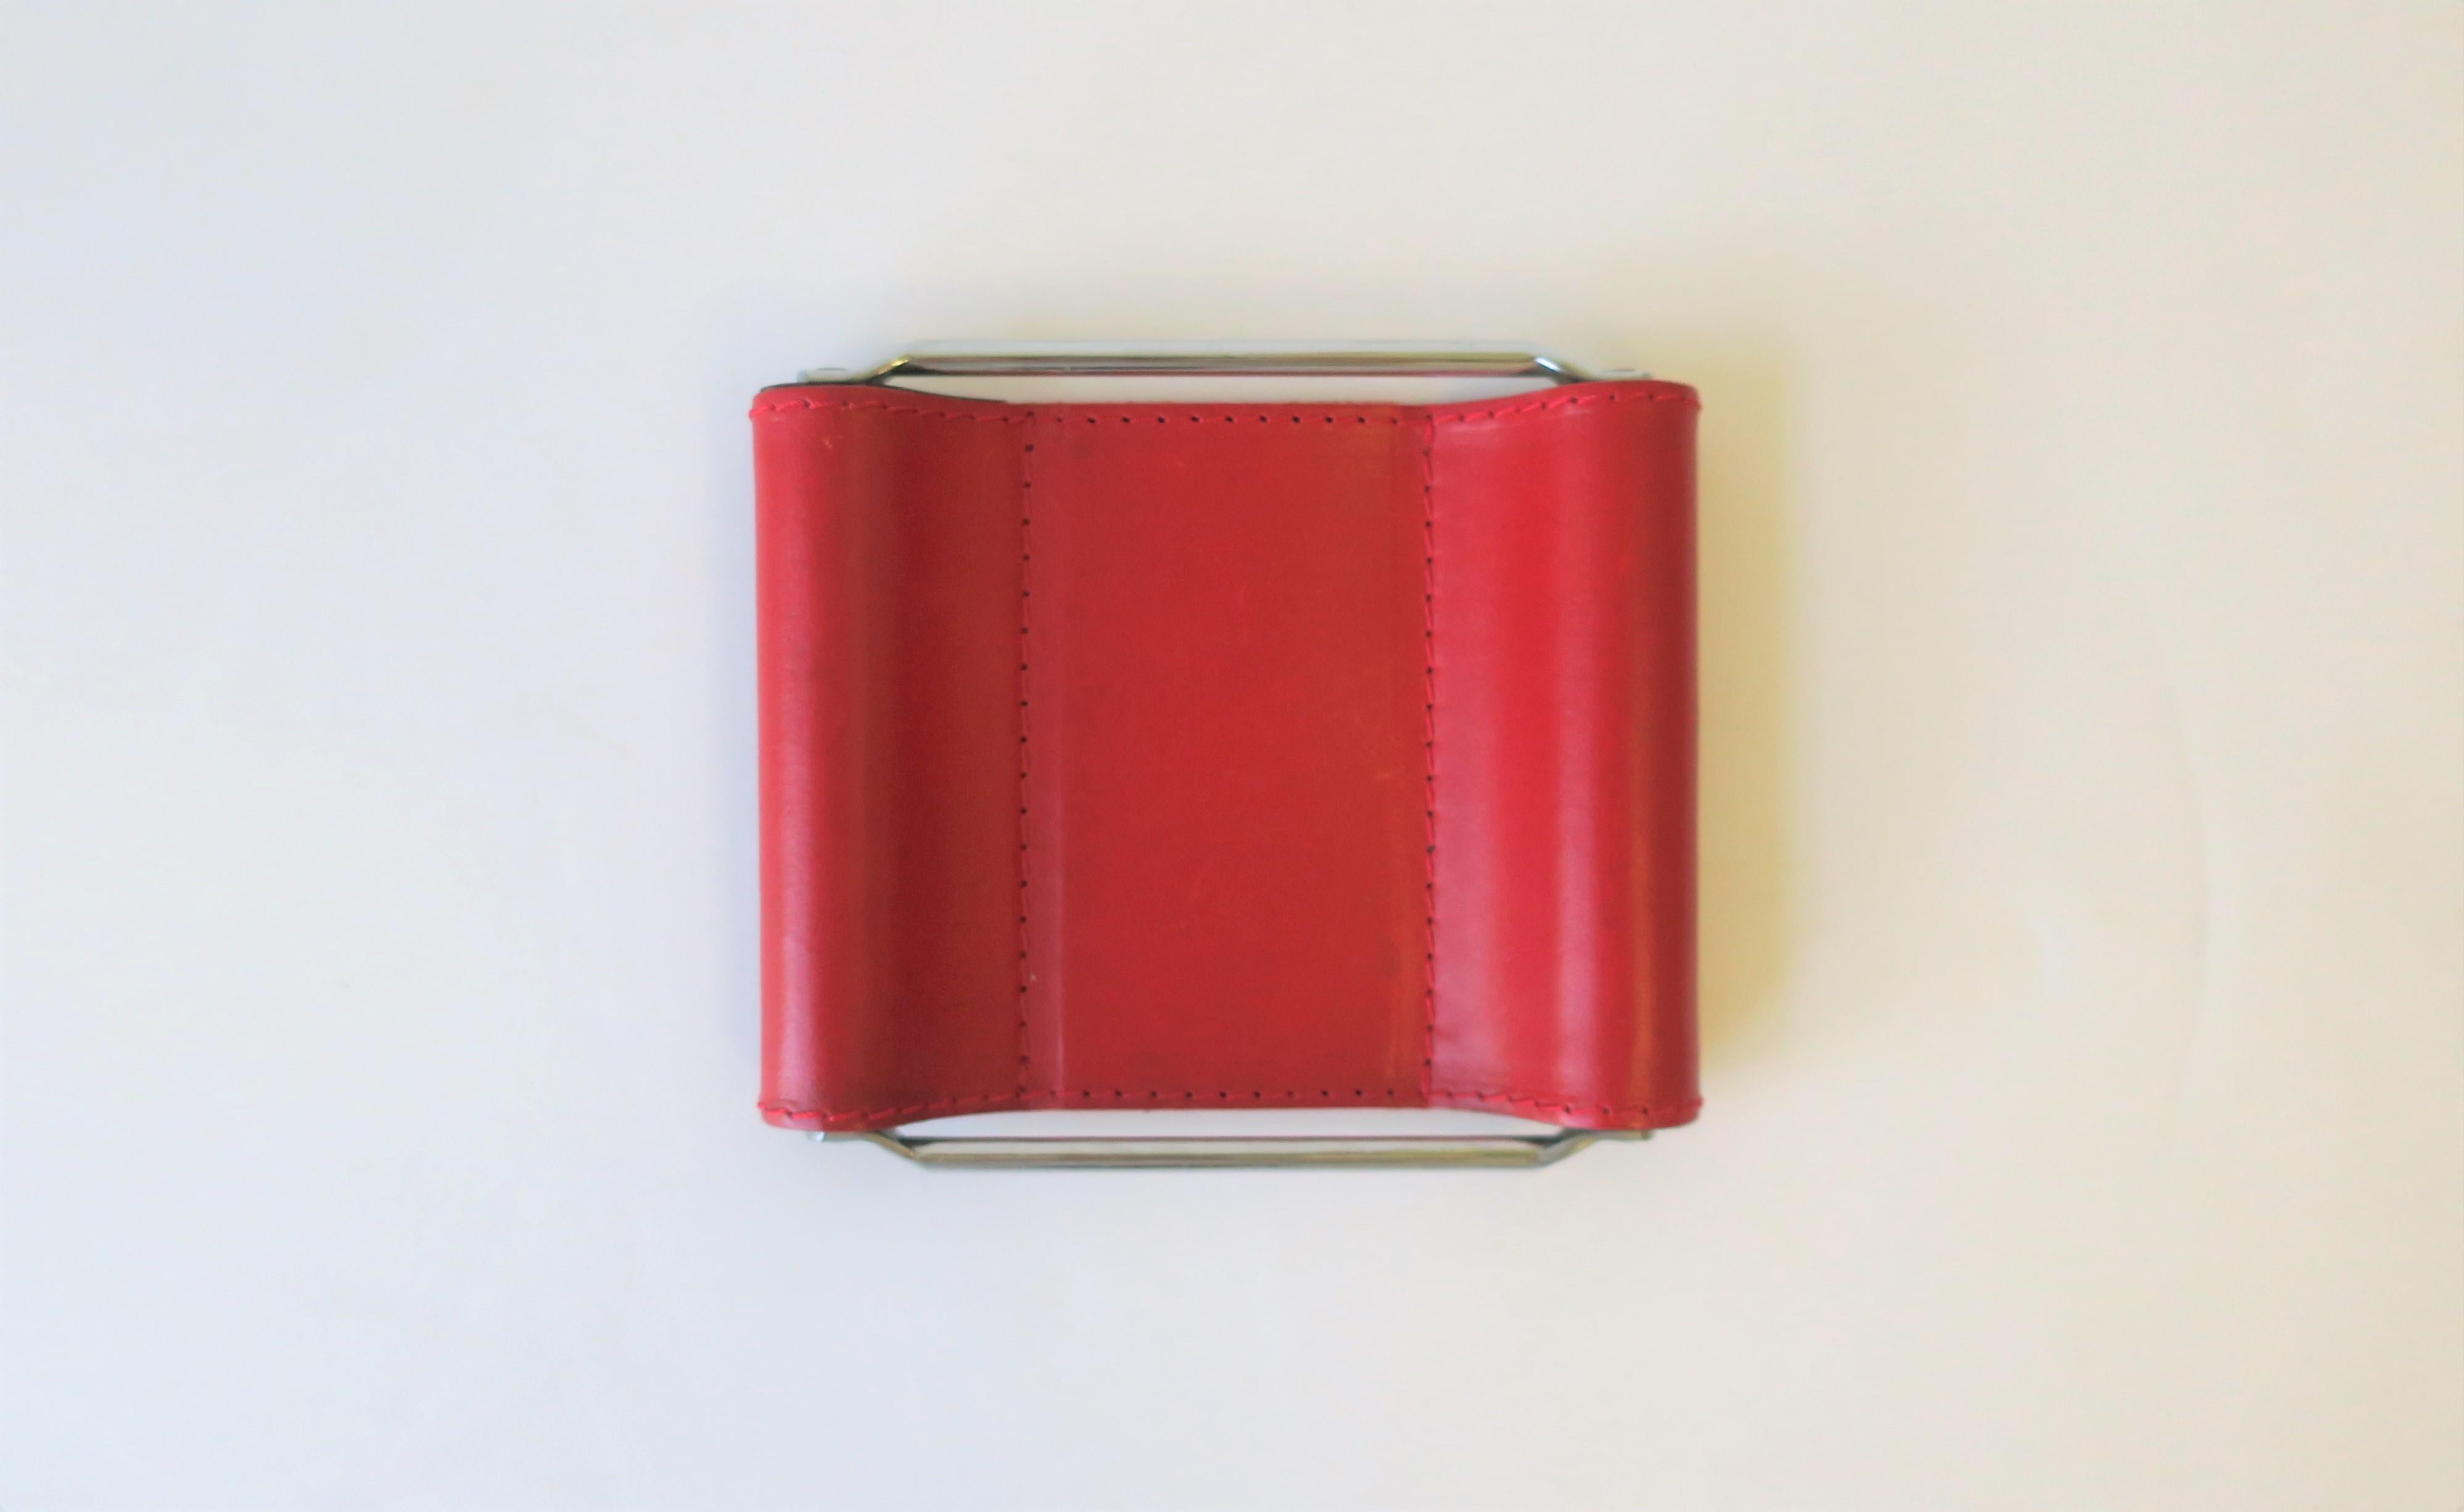 An Italian red leather jewelry dish vide-poche (catch-all) or desk vessel in the Minimalist or modern style, made in Italy as marked. Beautifully made/craftsmanship and quality materials. A great piece for a desk, nightstand, vanity, dressing, or